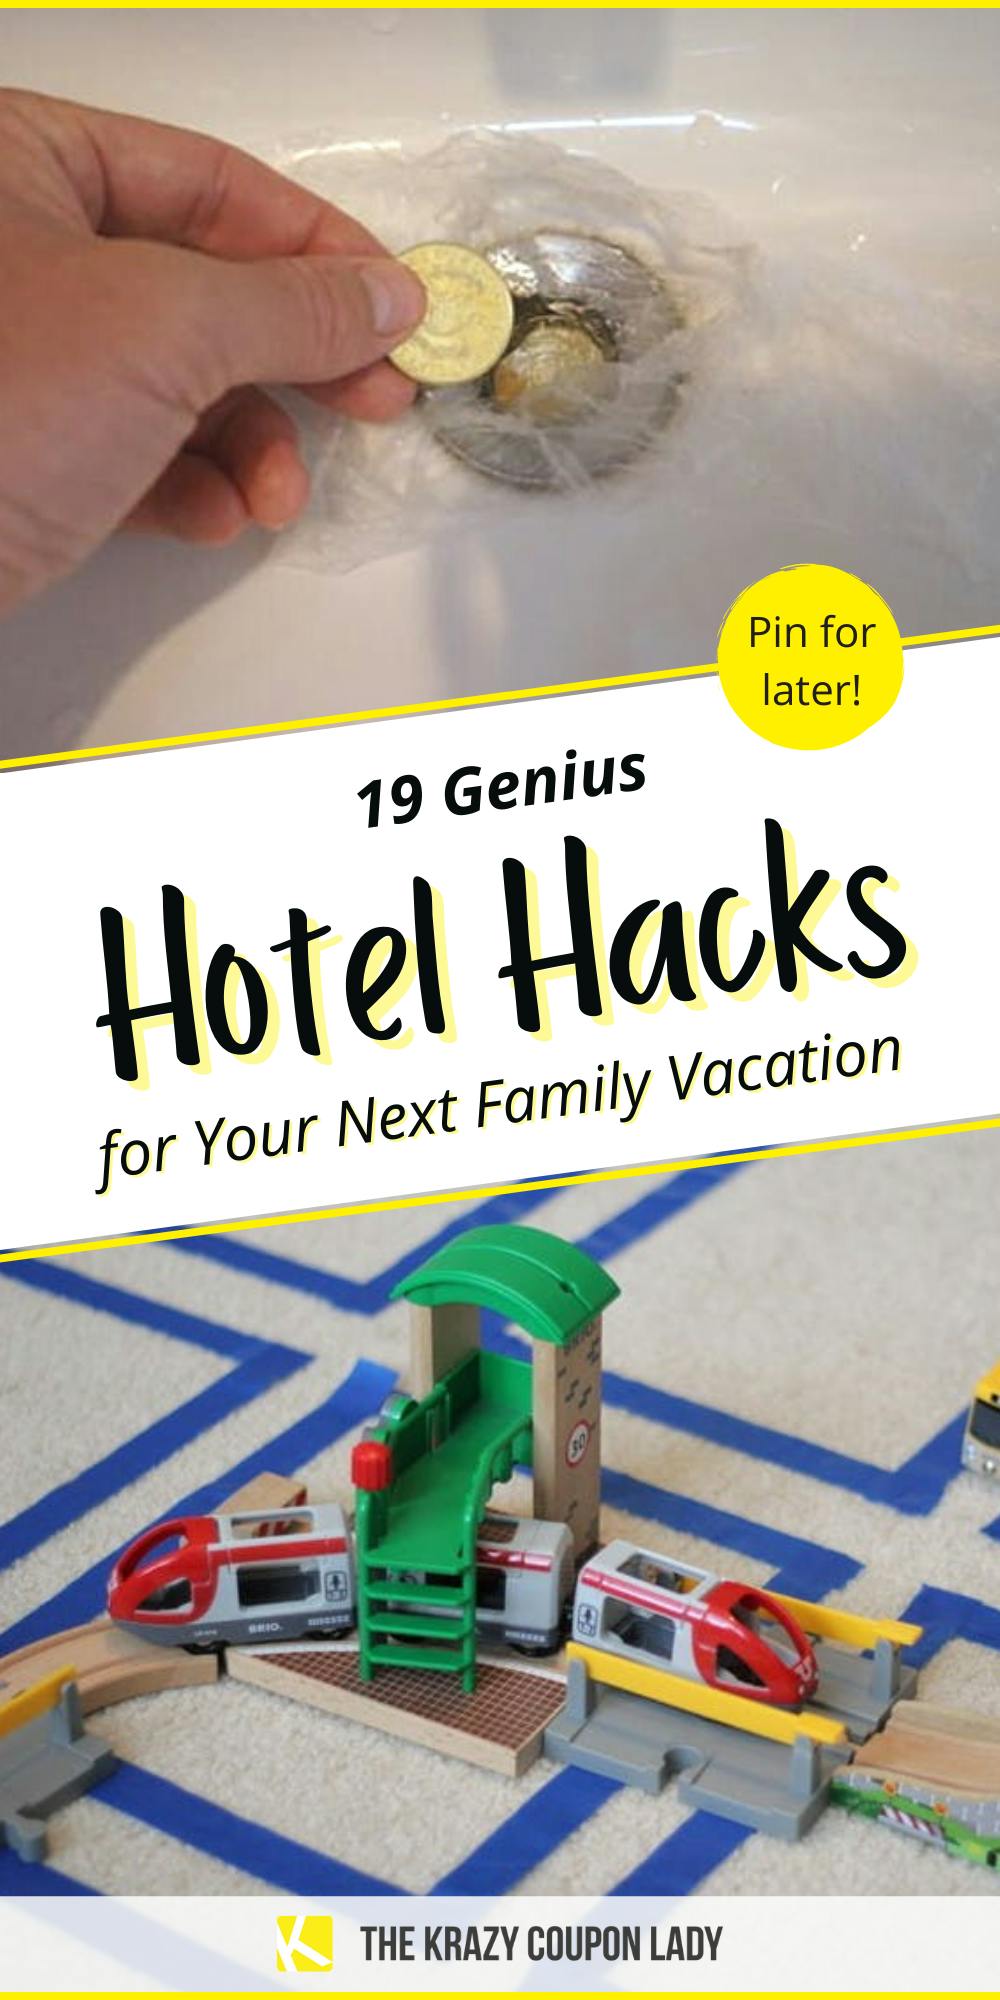 19 Clever Hotel Hacks for Your Next Family Vacation